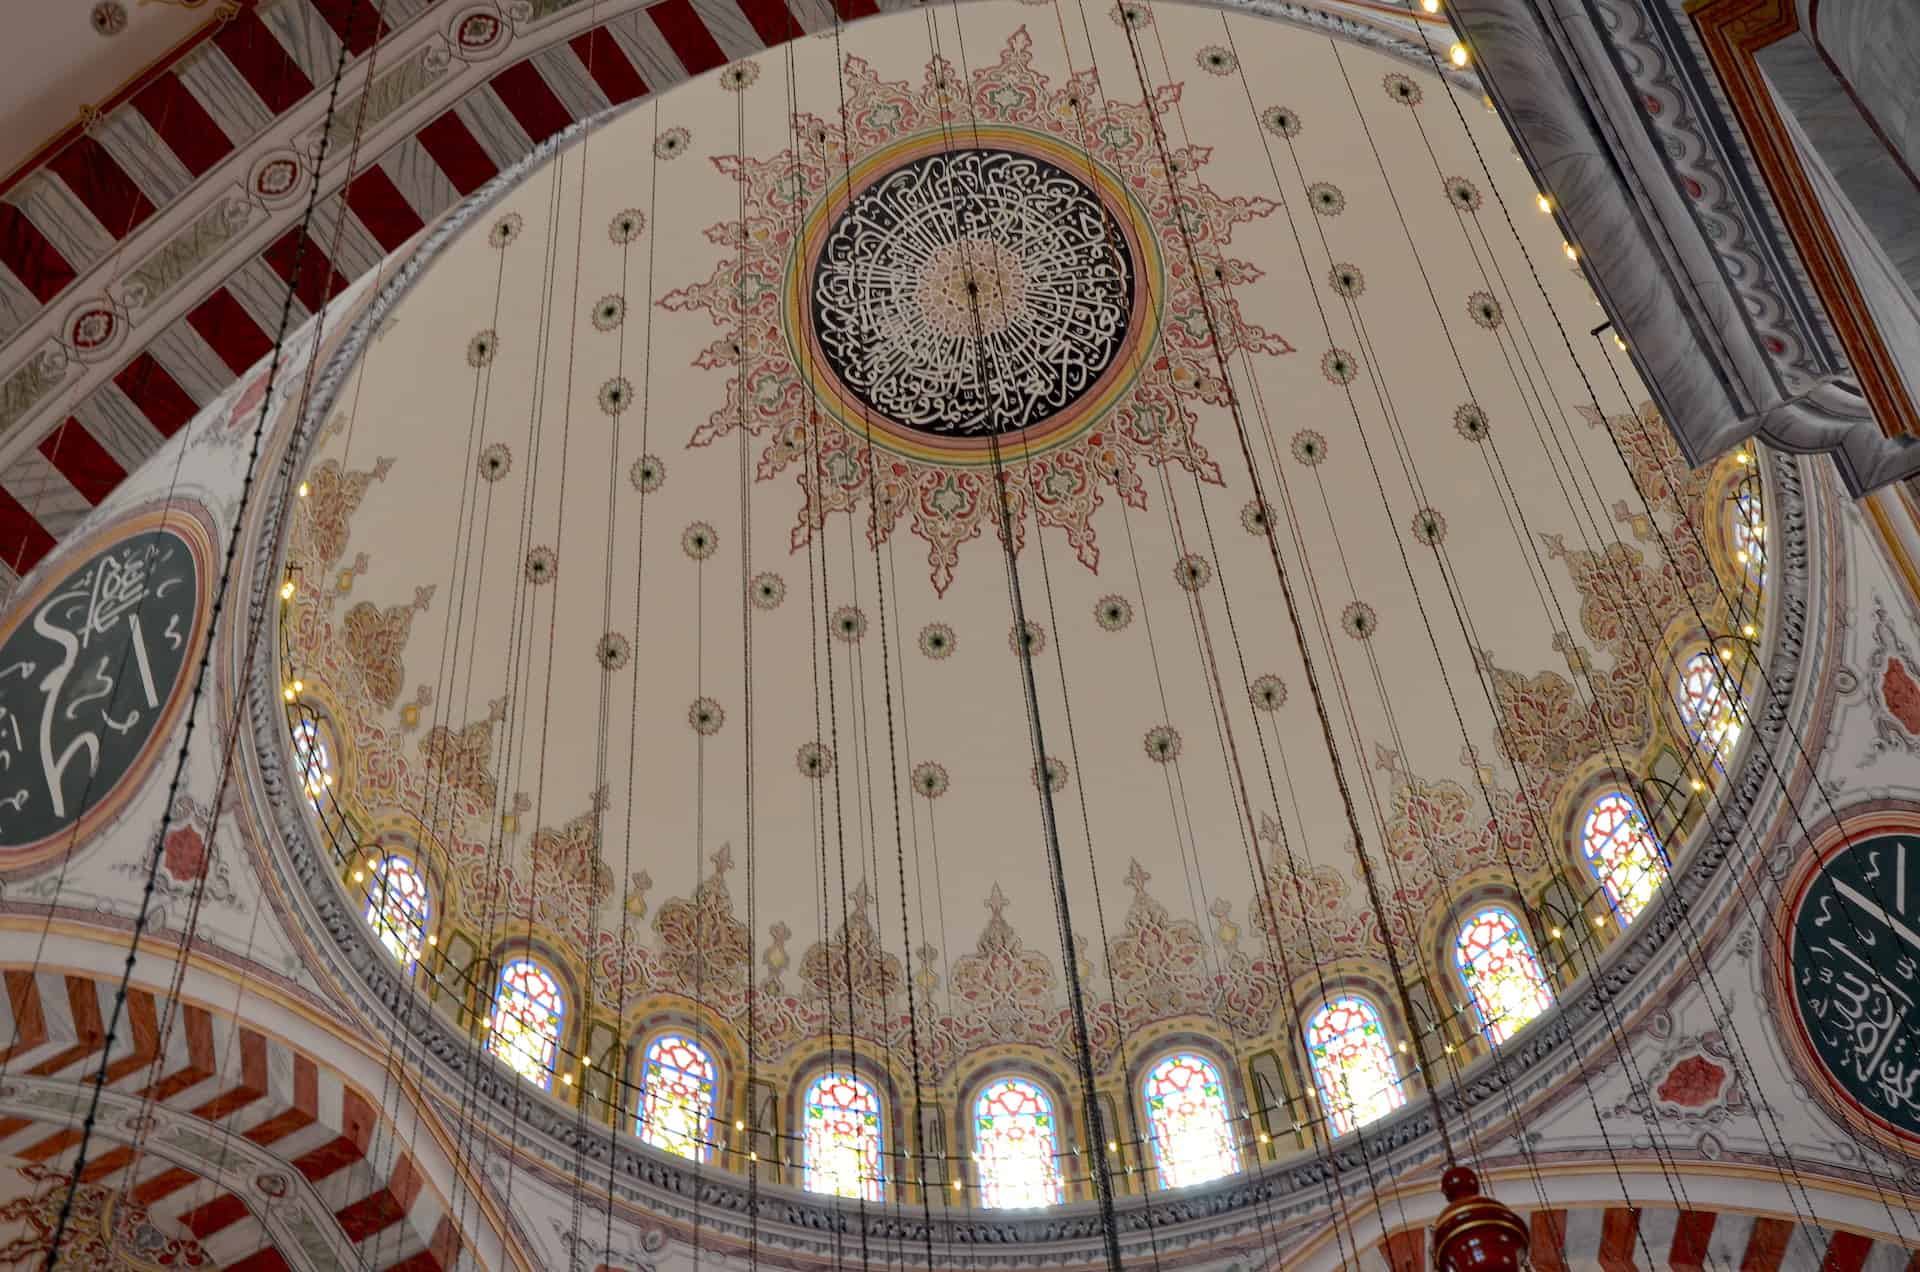 Dome at the Fatih Mosque in Istanbul, Turkey